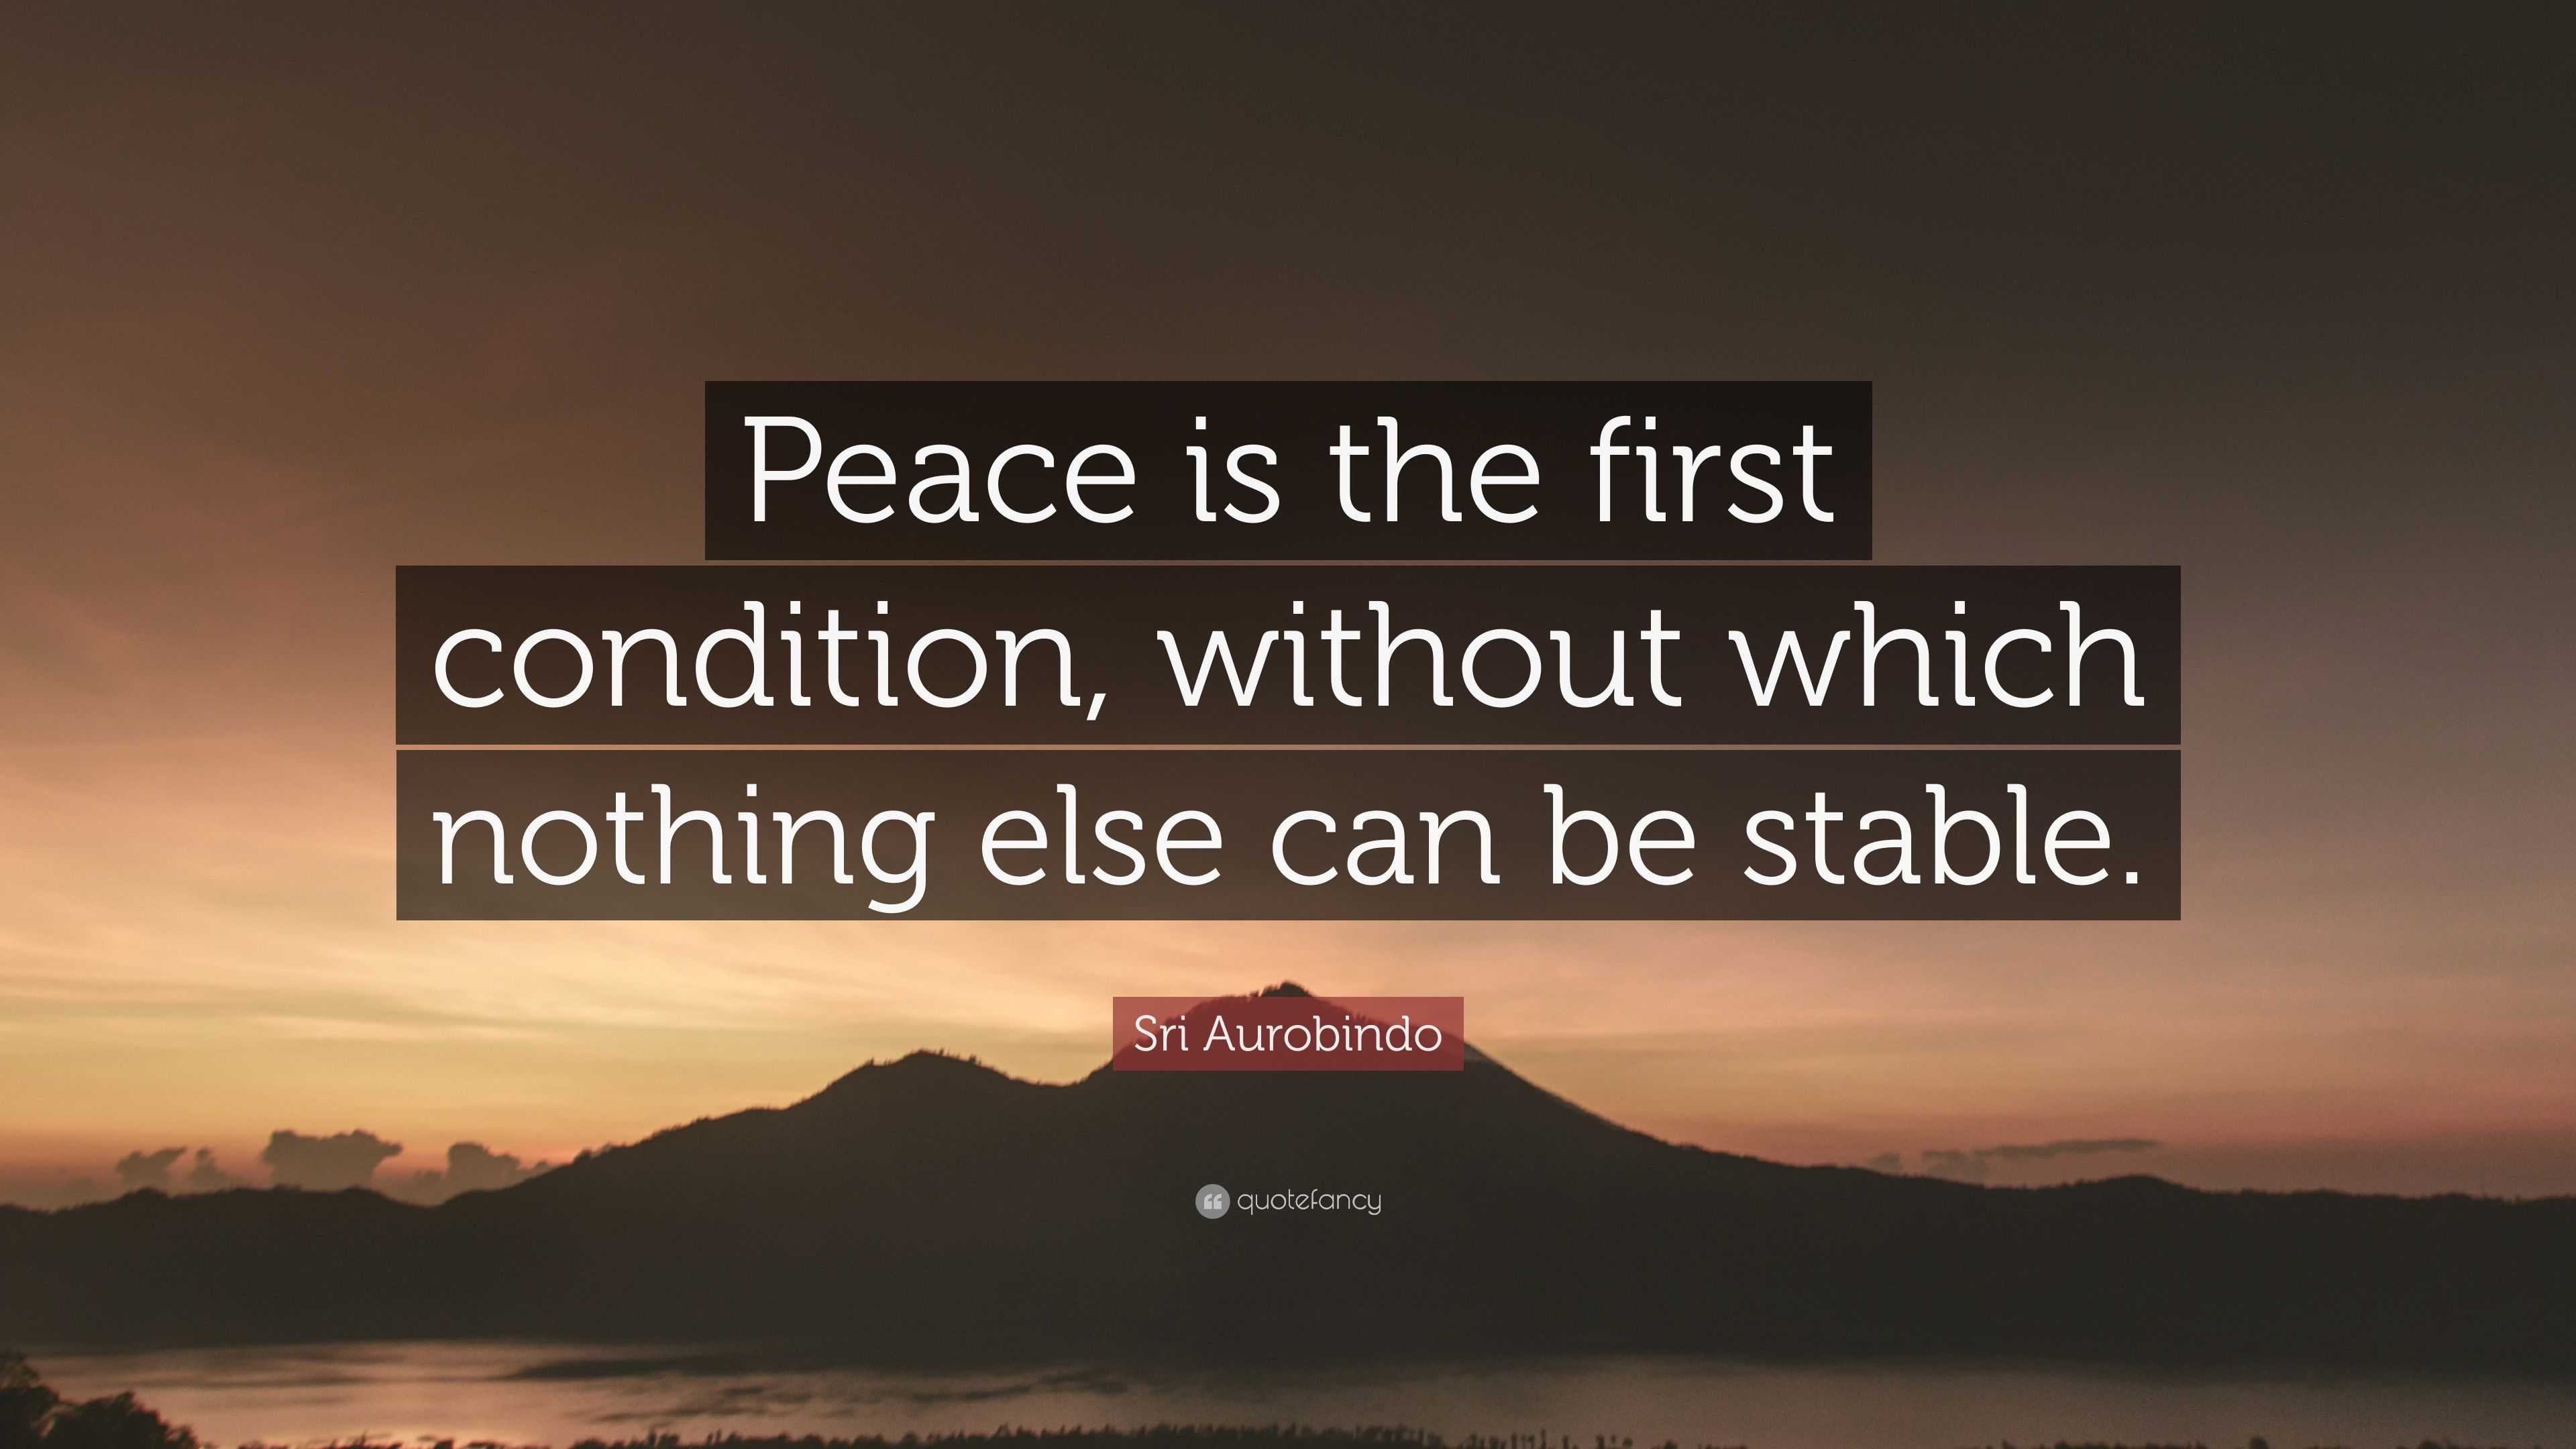 Sri Aurobindo Quote: “Peace is the first condition, without which ...